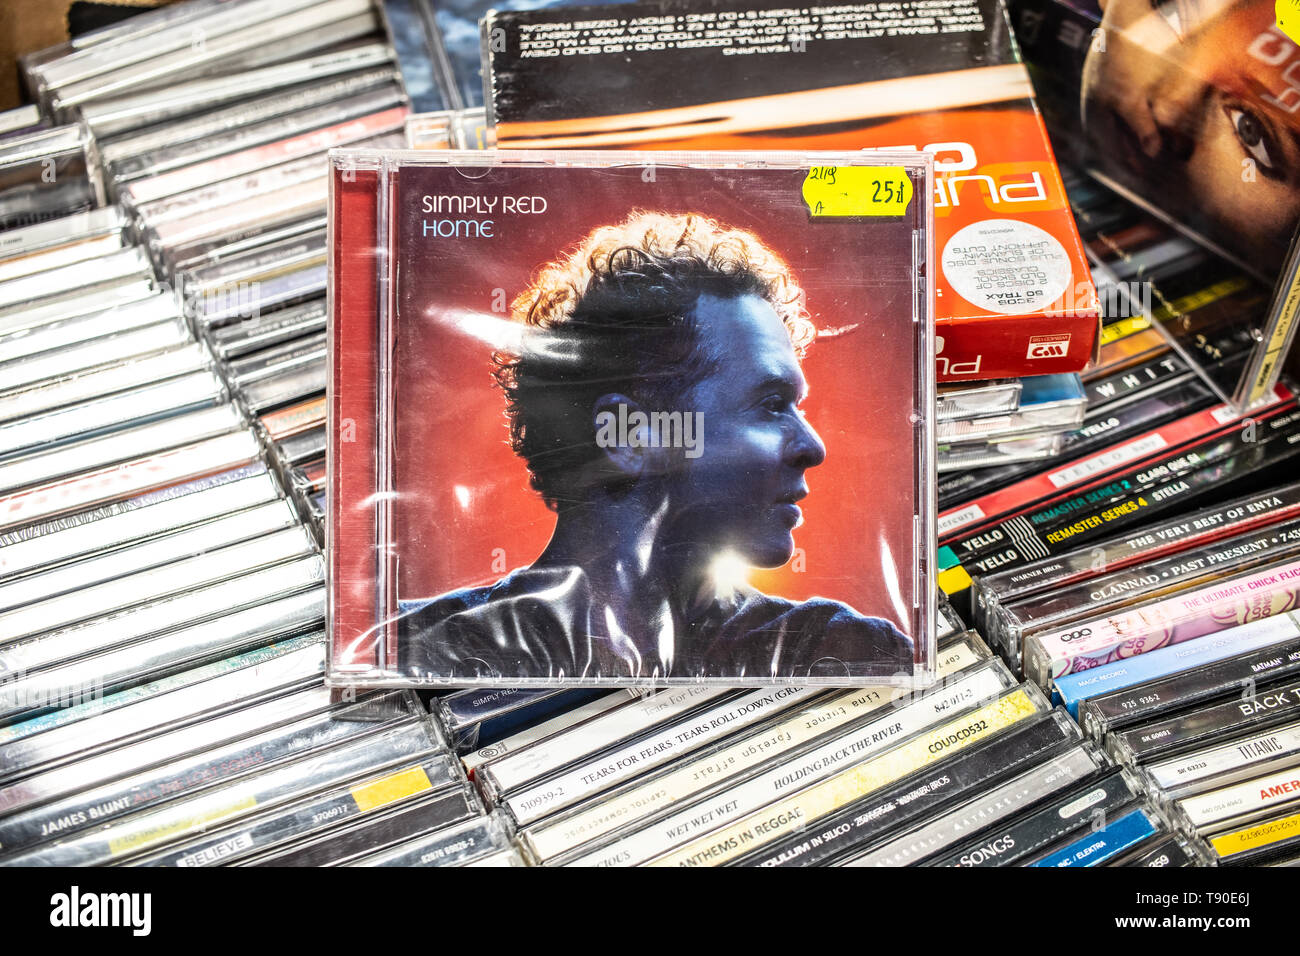 Nadarzyn, Poland, May 11, 2019: Simply Red HOME CD album on display for sale, famous British soul and pop band, lead singer Mick Hucknall, collection Stock Photo